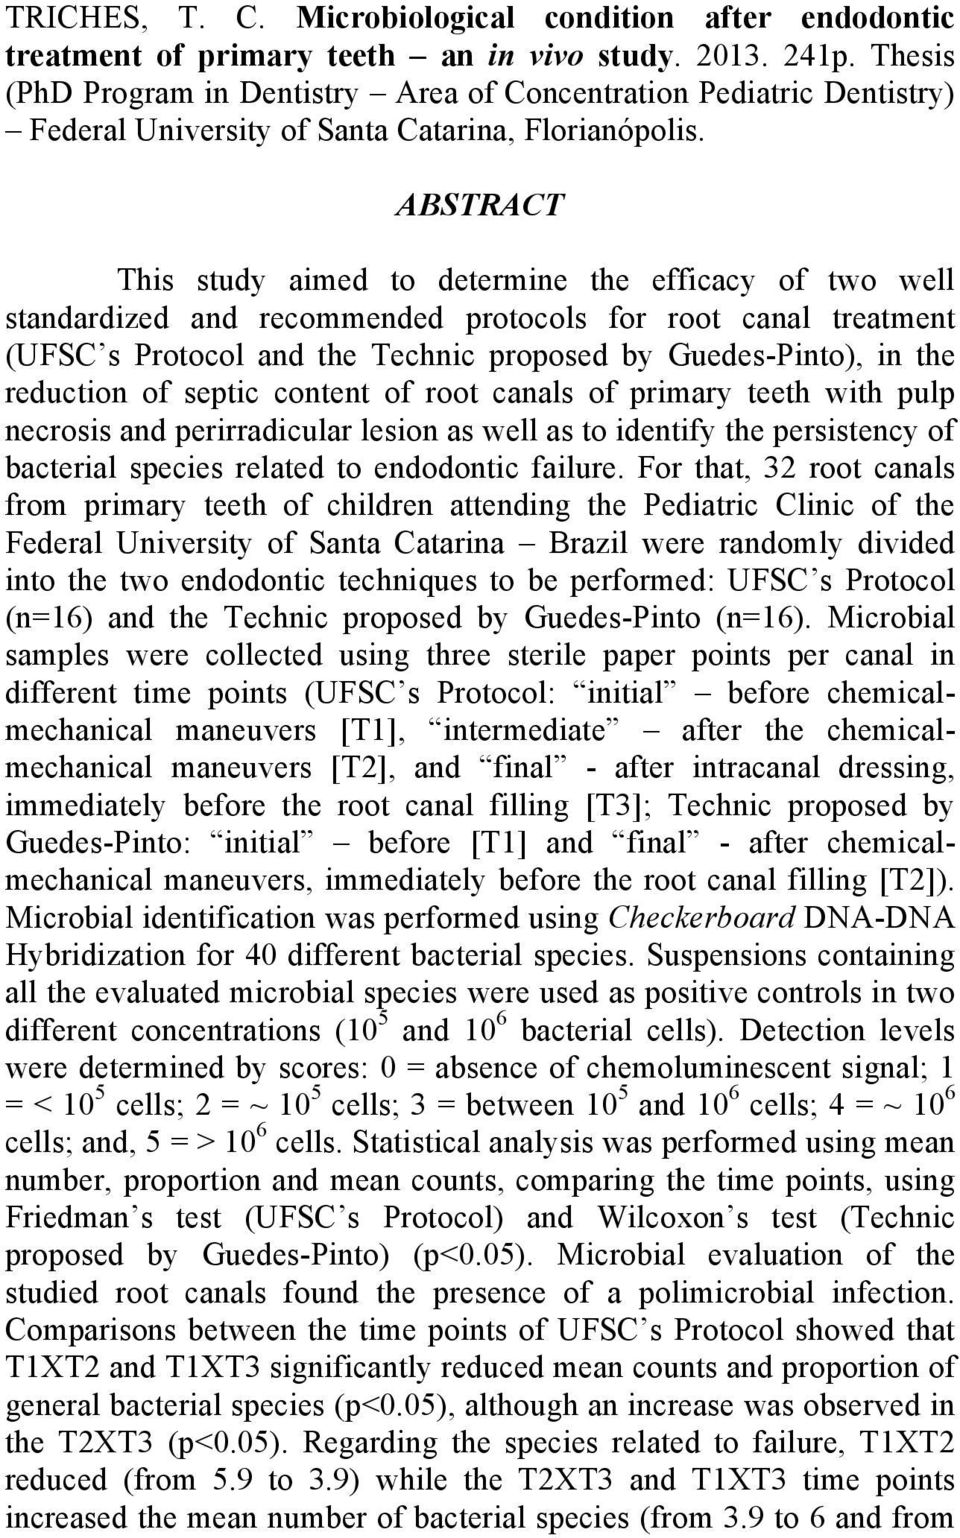 ABSTRACT This study aimed to determine the efficacy of two well standardized and recommended protocols for root canal treatment (UFSC s Protocol and the Technic proposed by Guedes-Pinto), in the